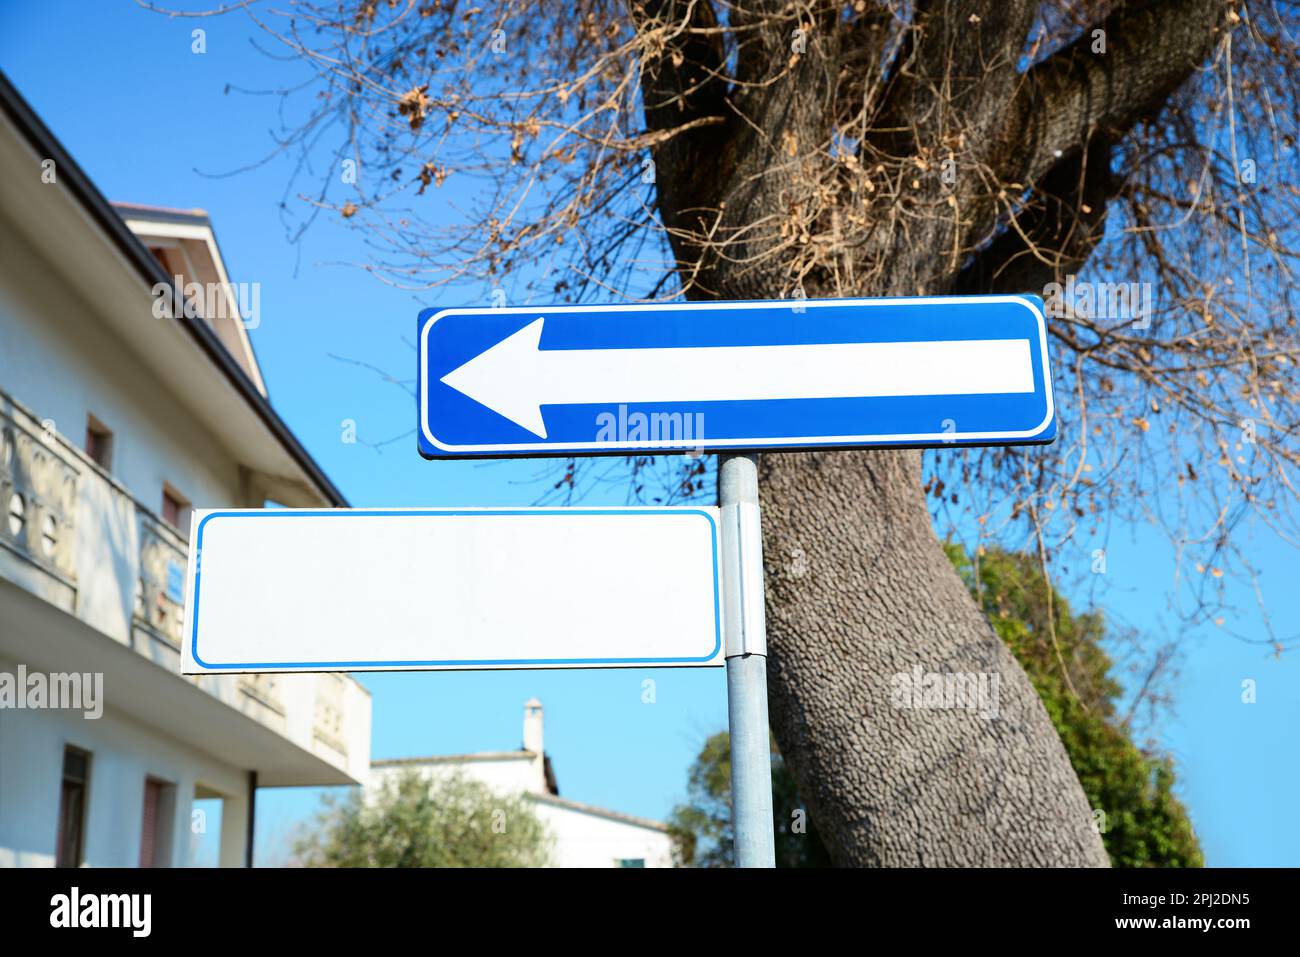 Road sign One Way Traffic and street name plate on pole outdoors Stock Photo